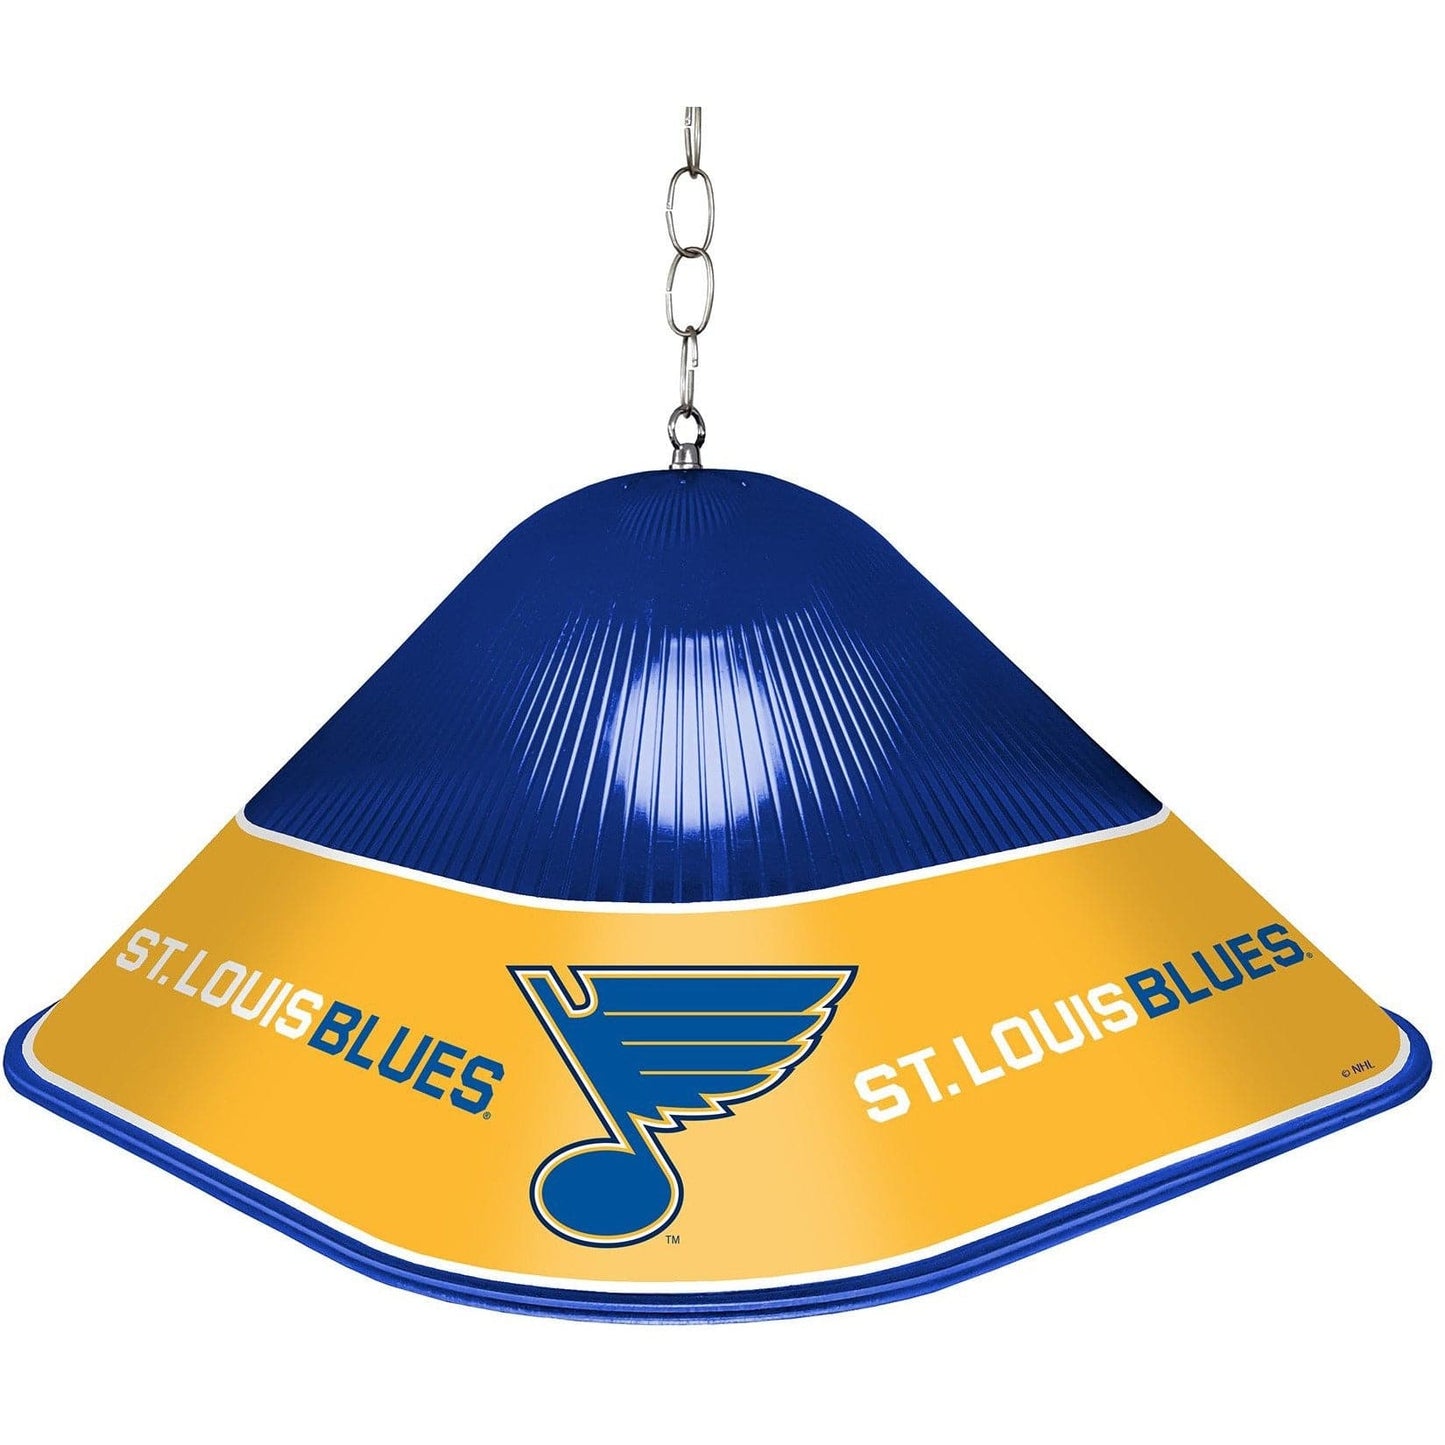 St. Louis Blues: Game Table Light - The Fan-Brand